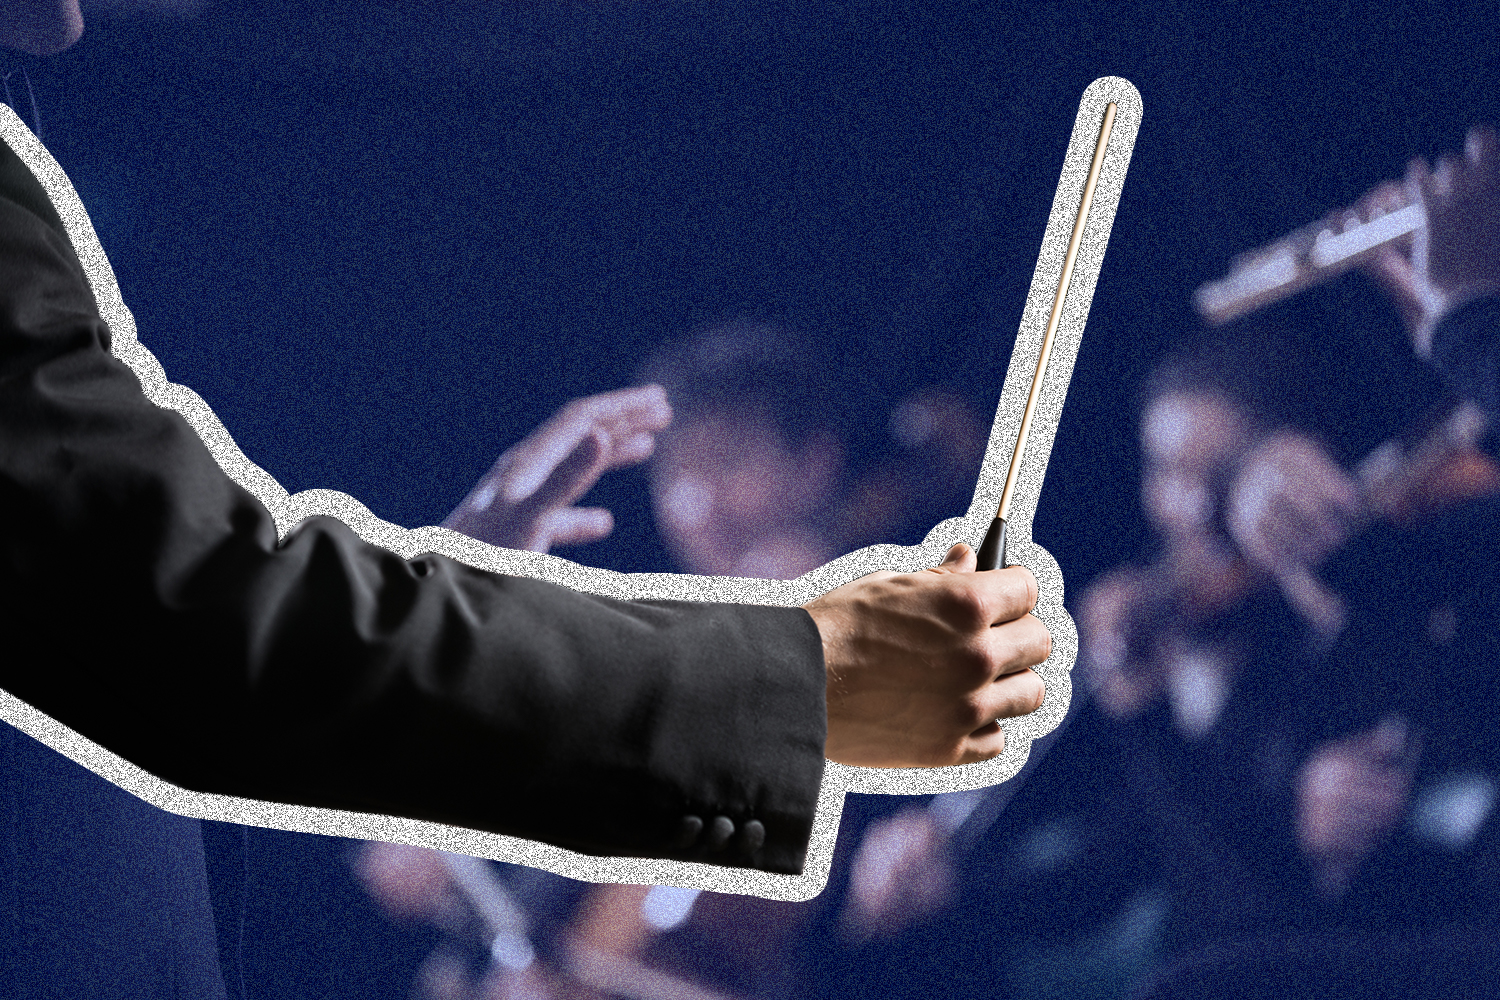 Image of conductor leading an orchestra.